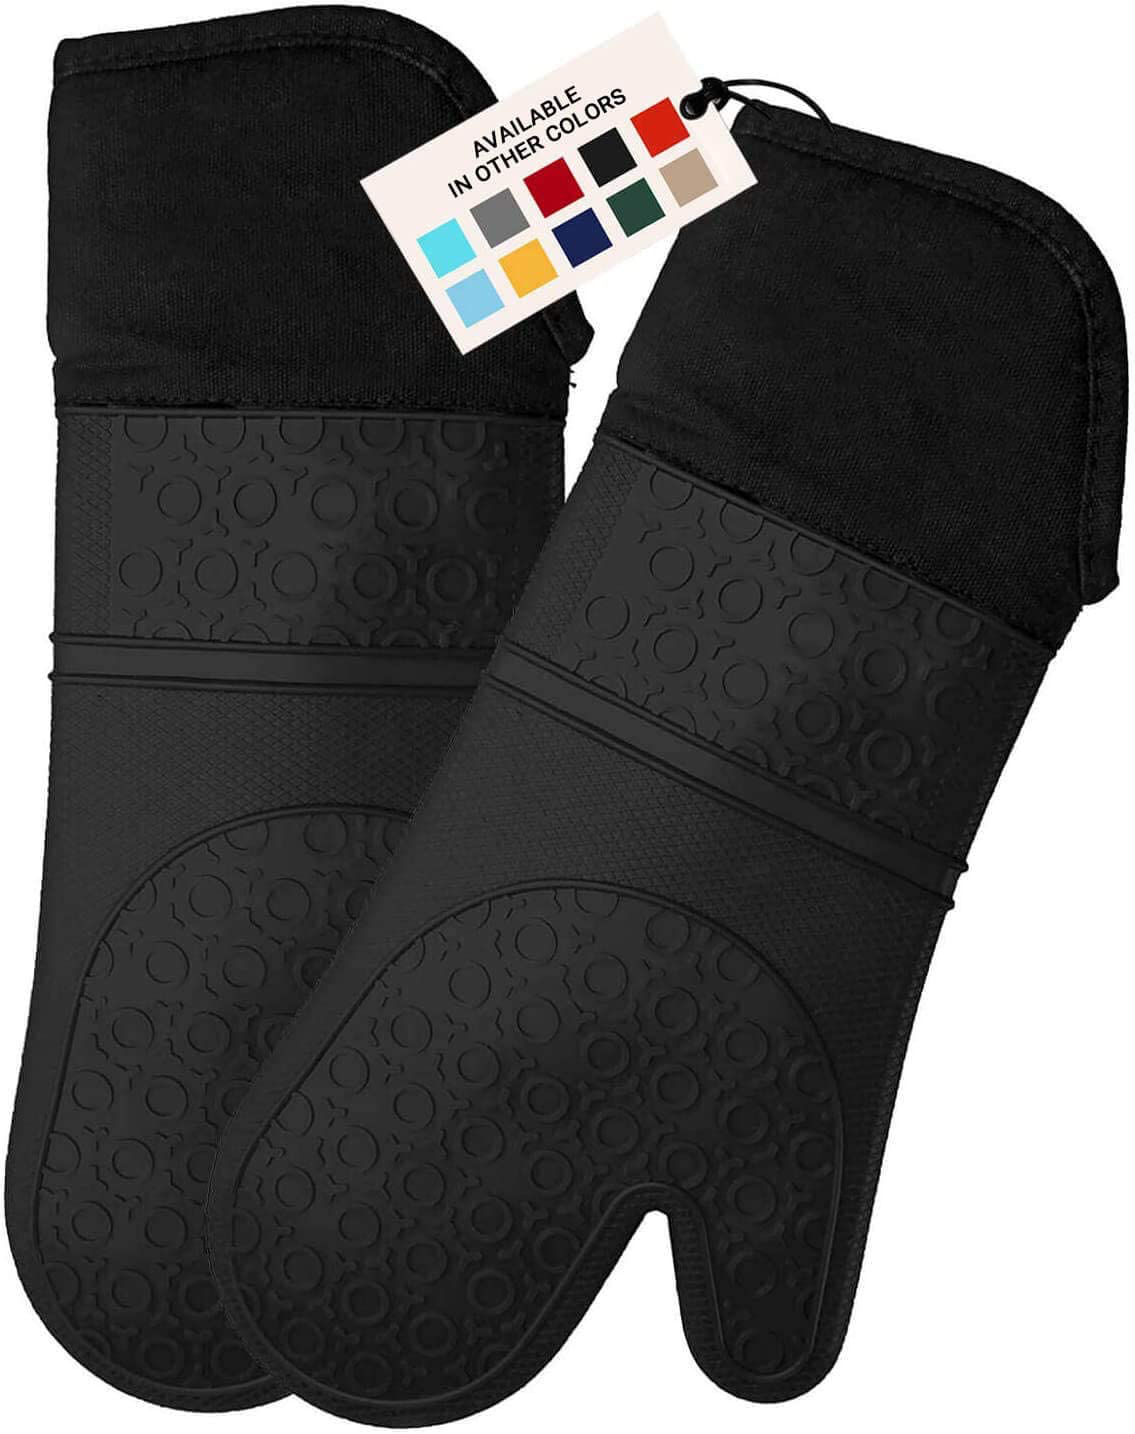 HOMWE Extra Long Professional Silicone Oven Mitt, Oven Mitts with Quilted Liner, Heat Resistant Pot Holders, Flexible Oven Gloves